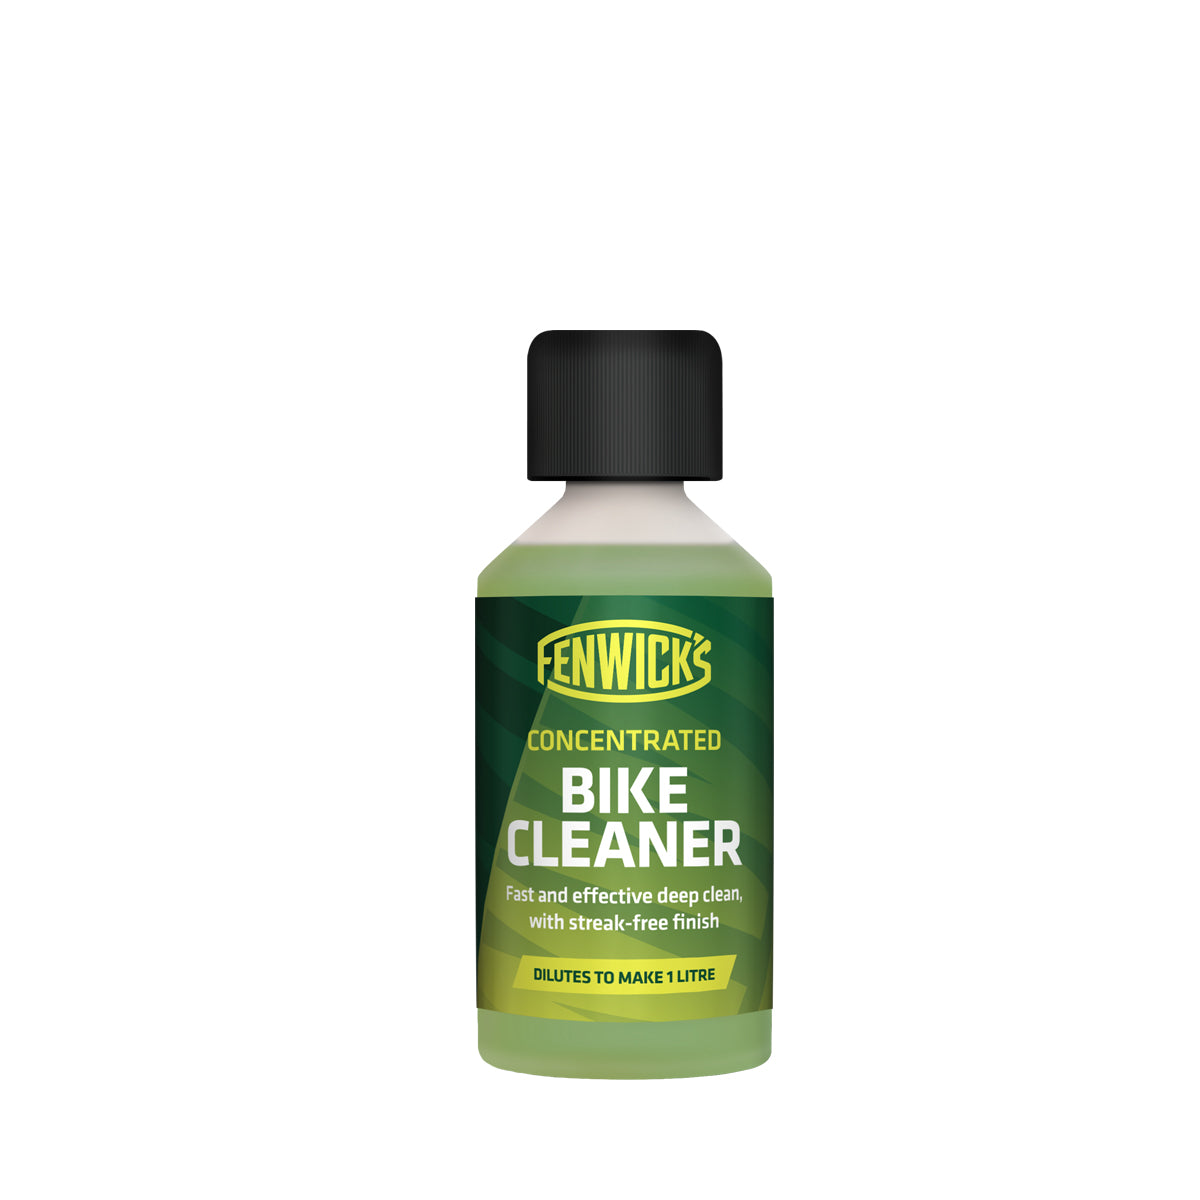 Fenwick's Bike Cleaner Concentrate